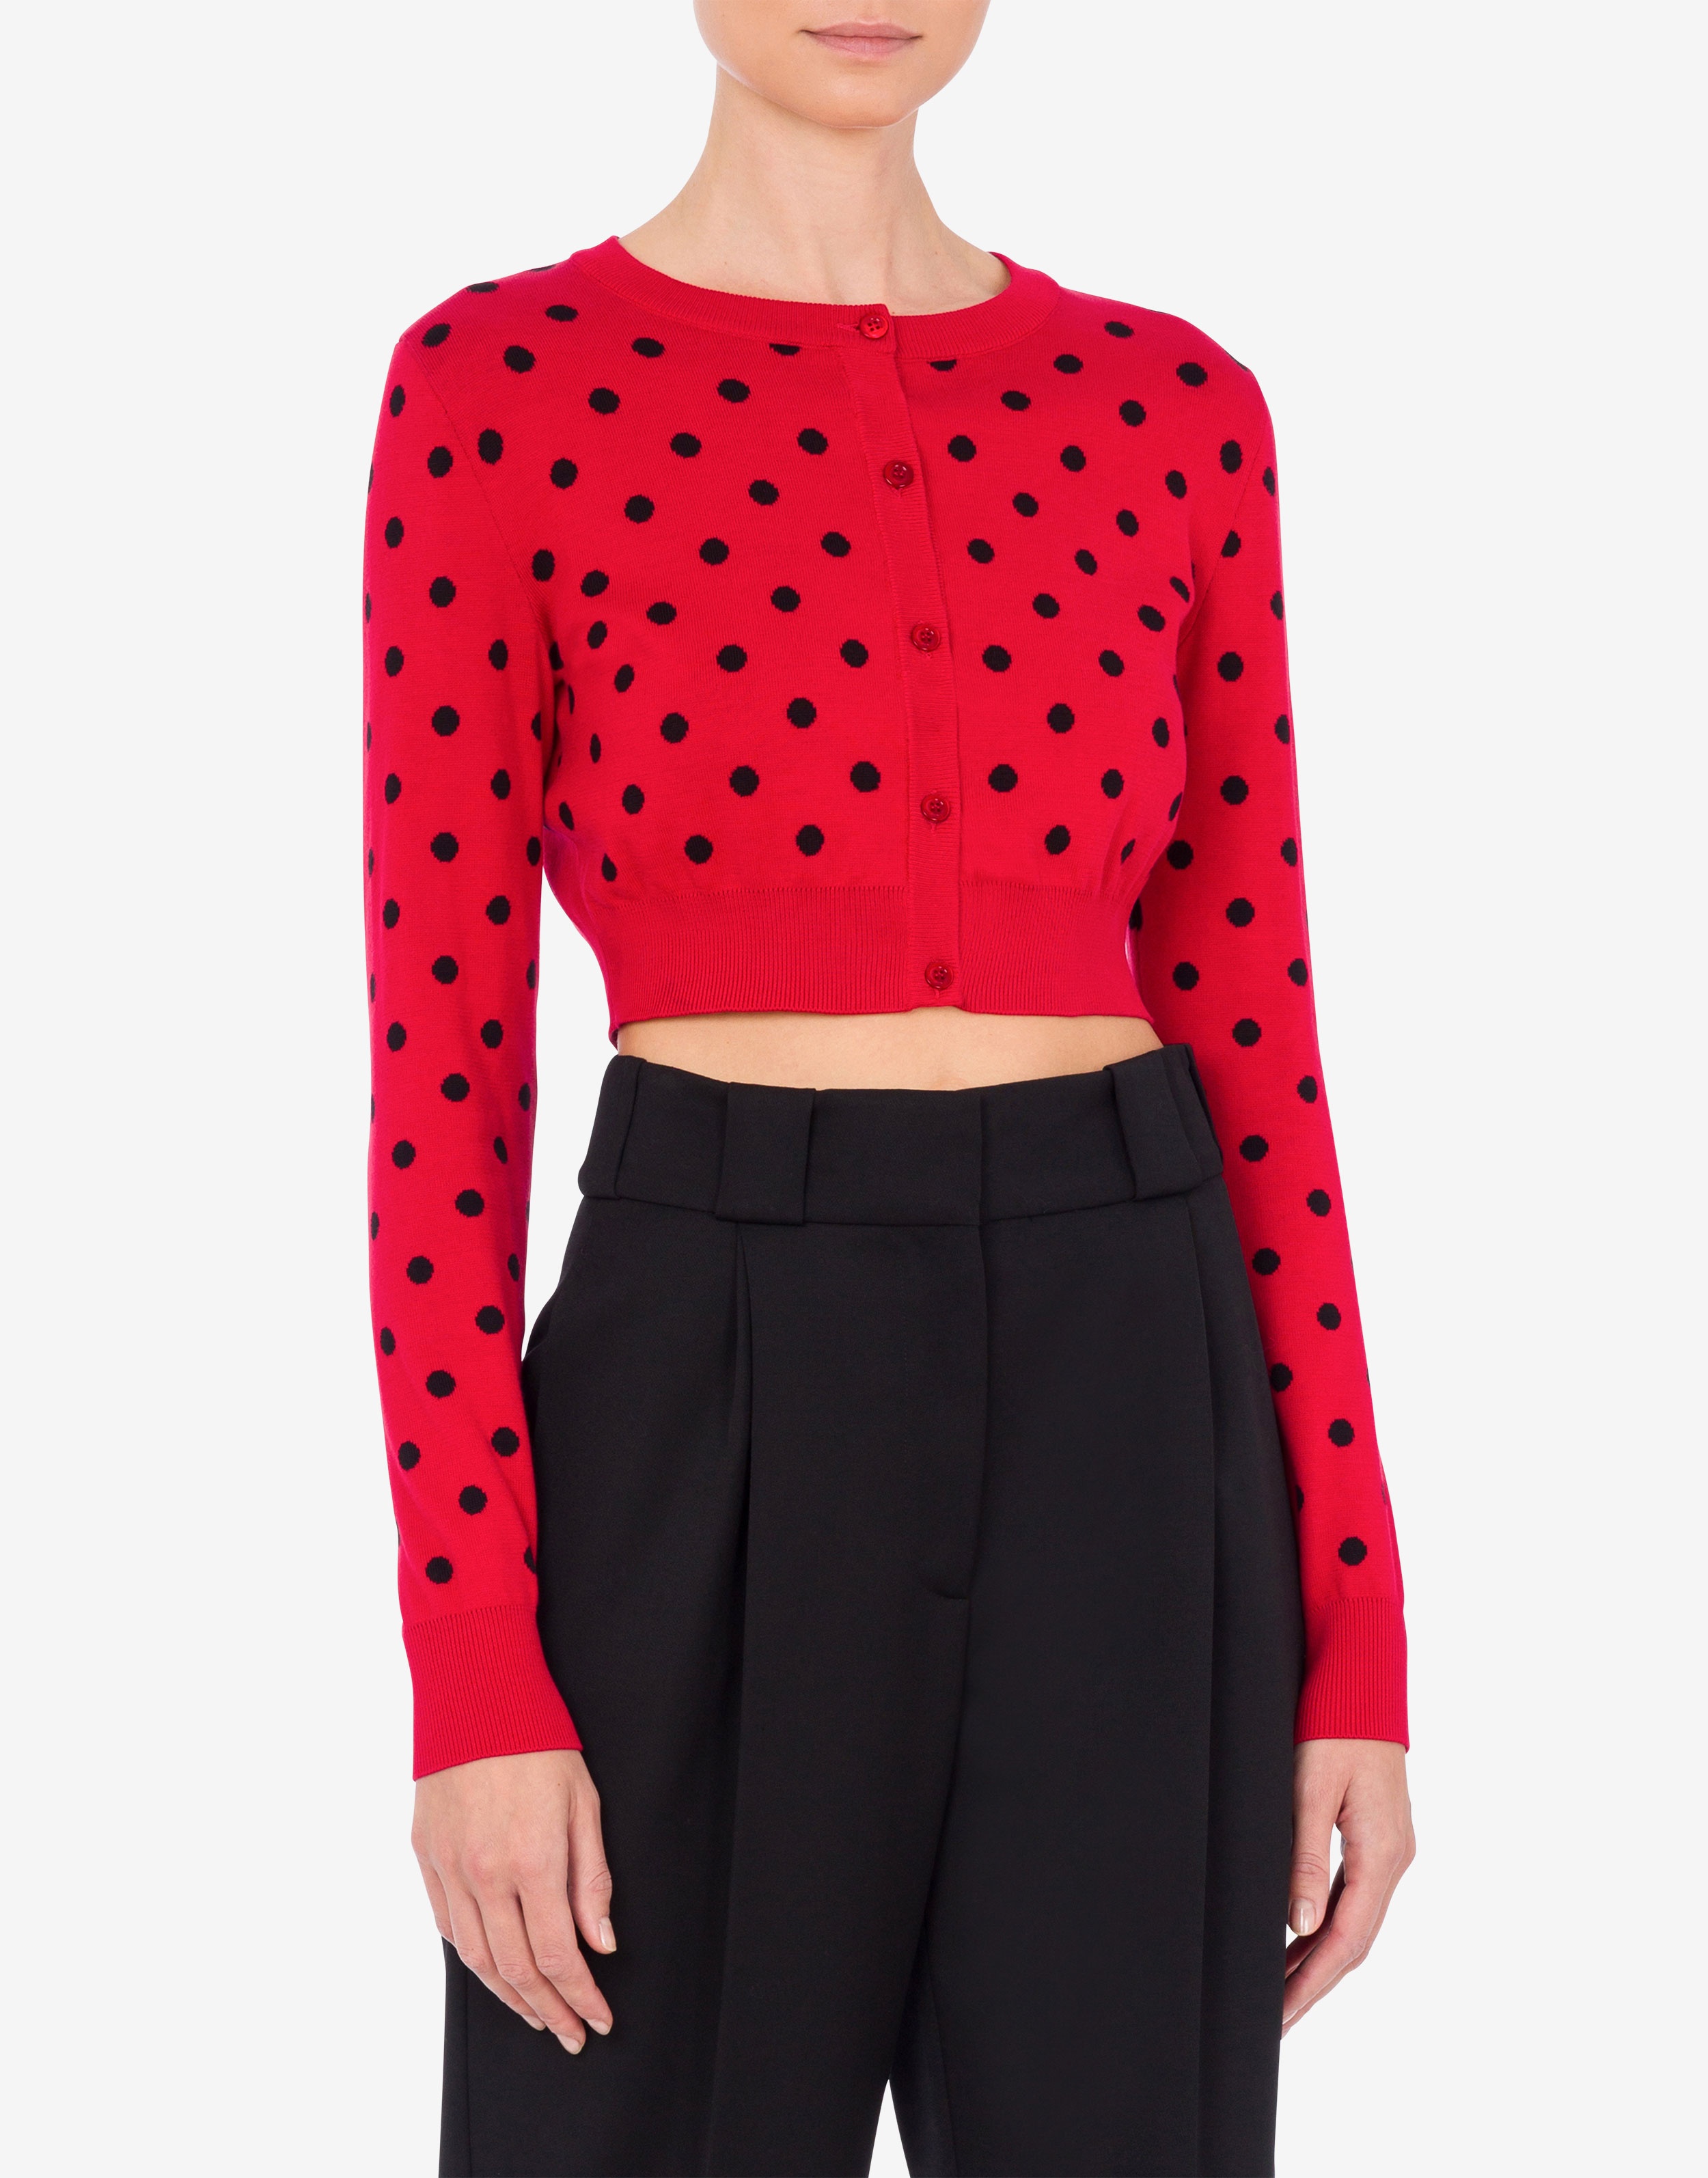 ALLOVER POLKA DOTS KNITTED CROPPED CARDIGAN - 2